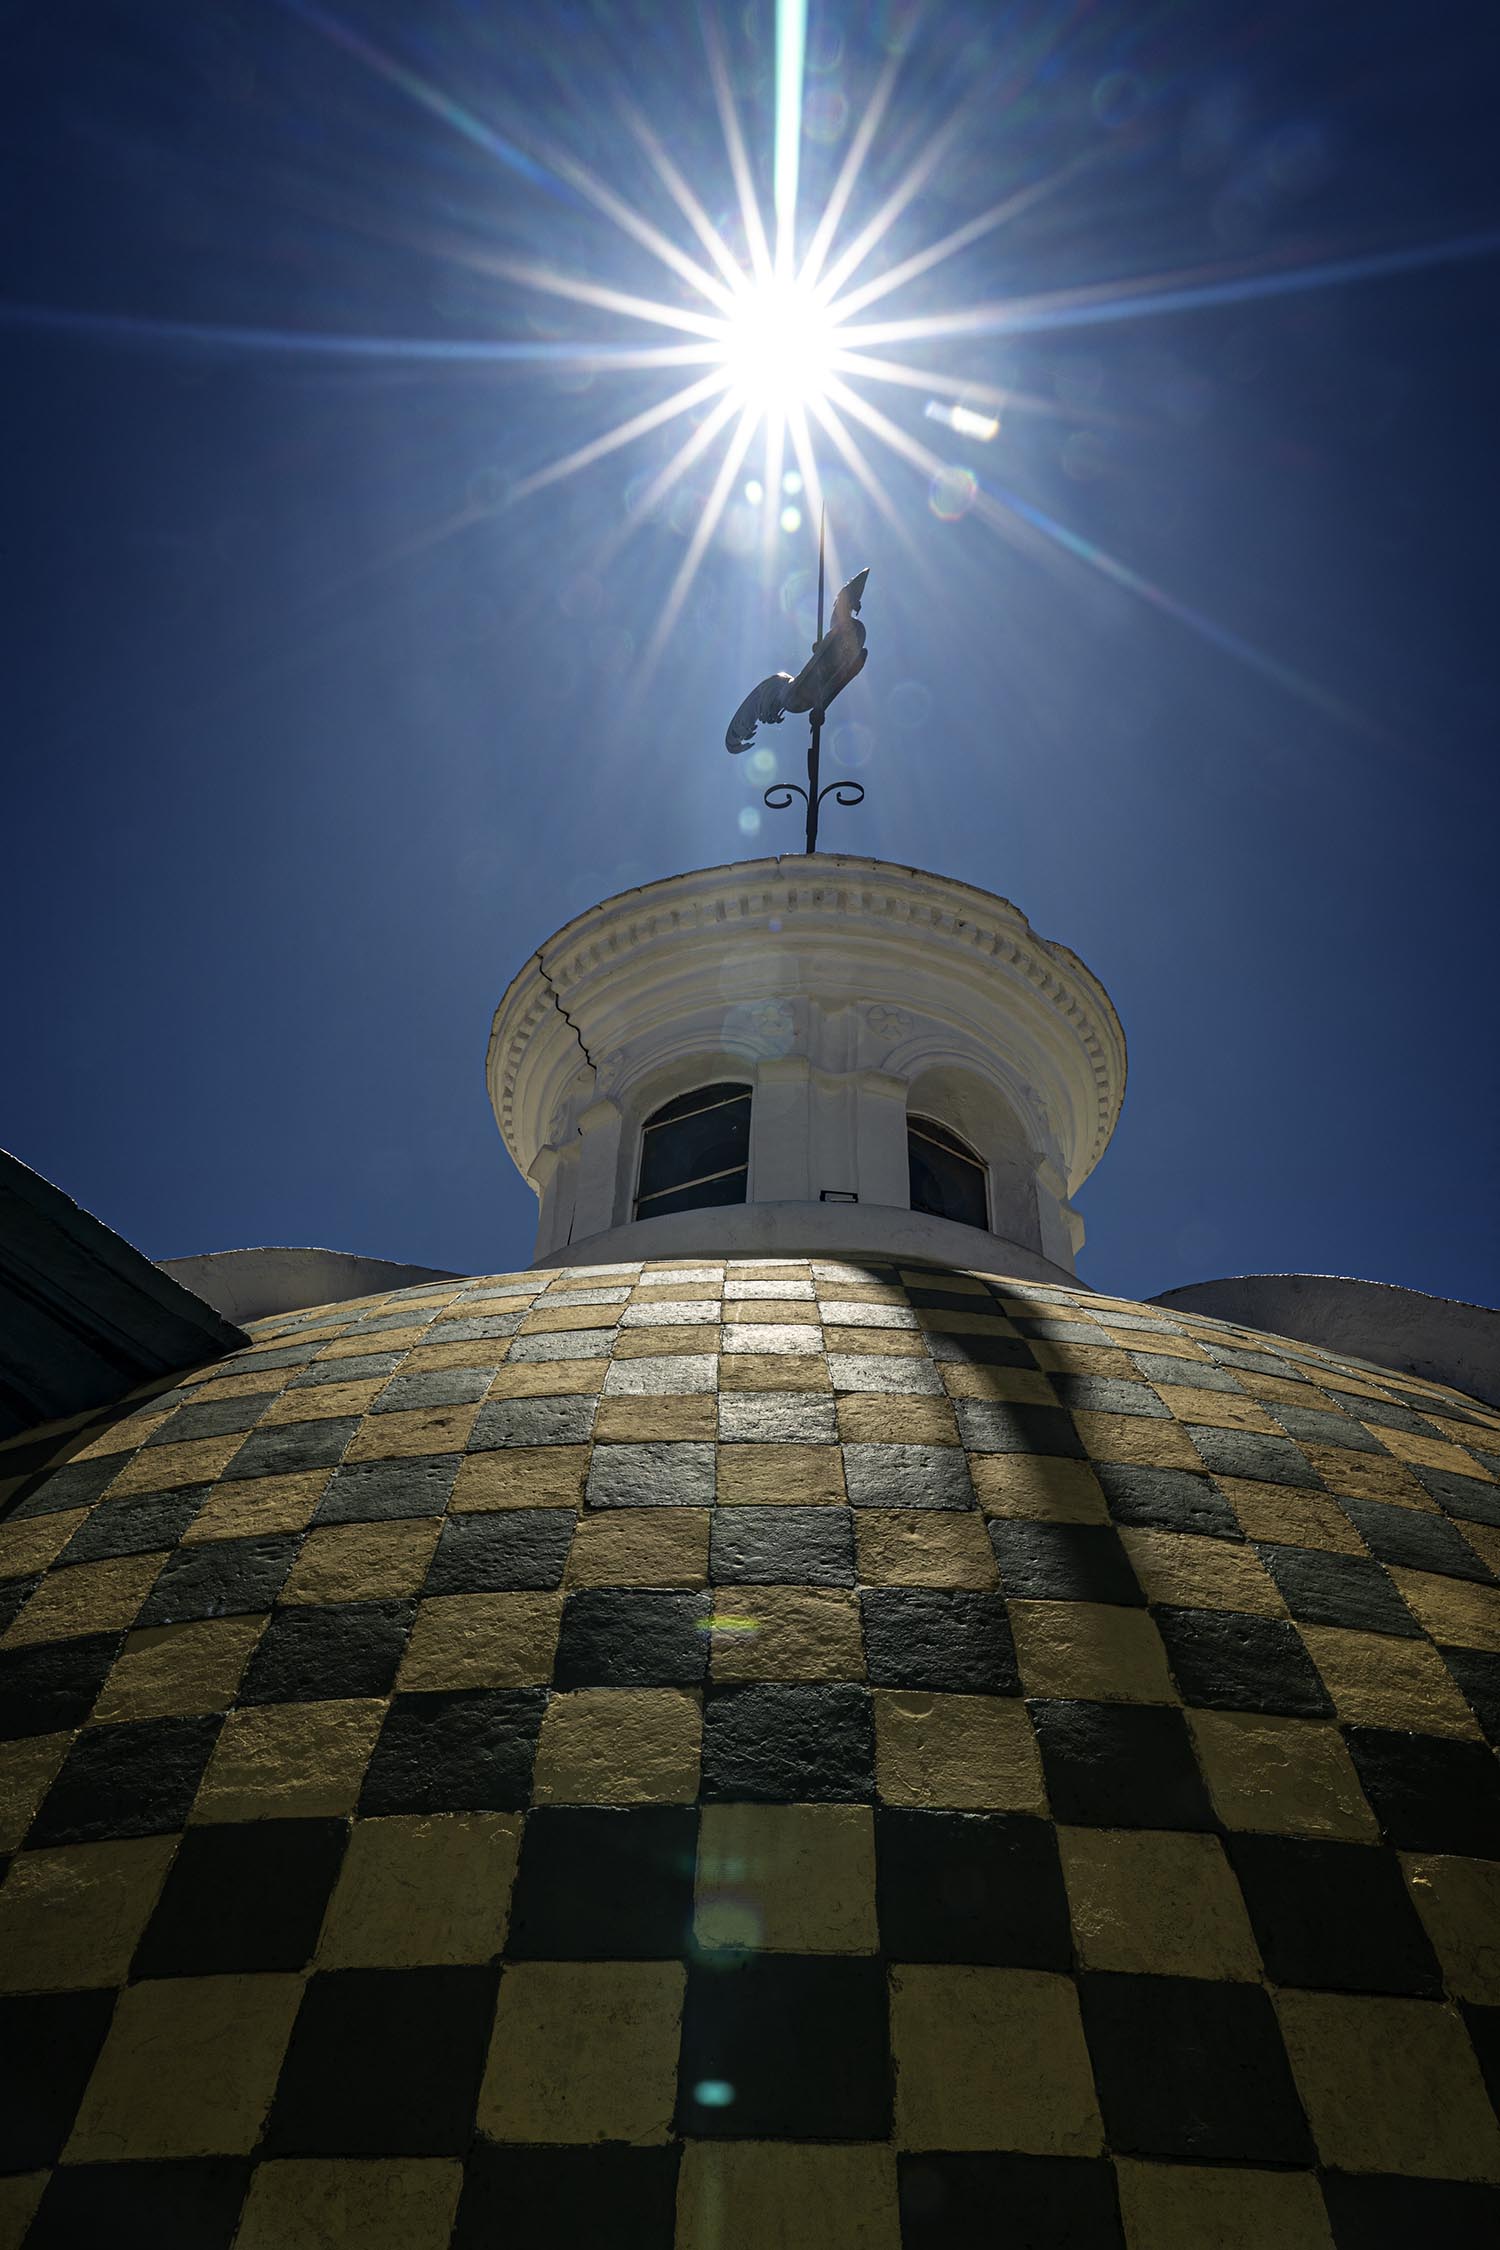 Atop a domed building with a black and white checkered roof sits a rooster weather vane, haloed by the sun